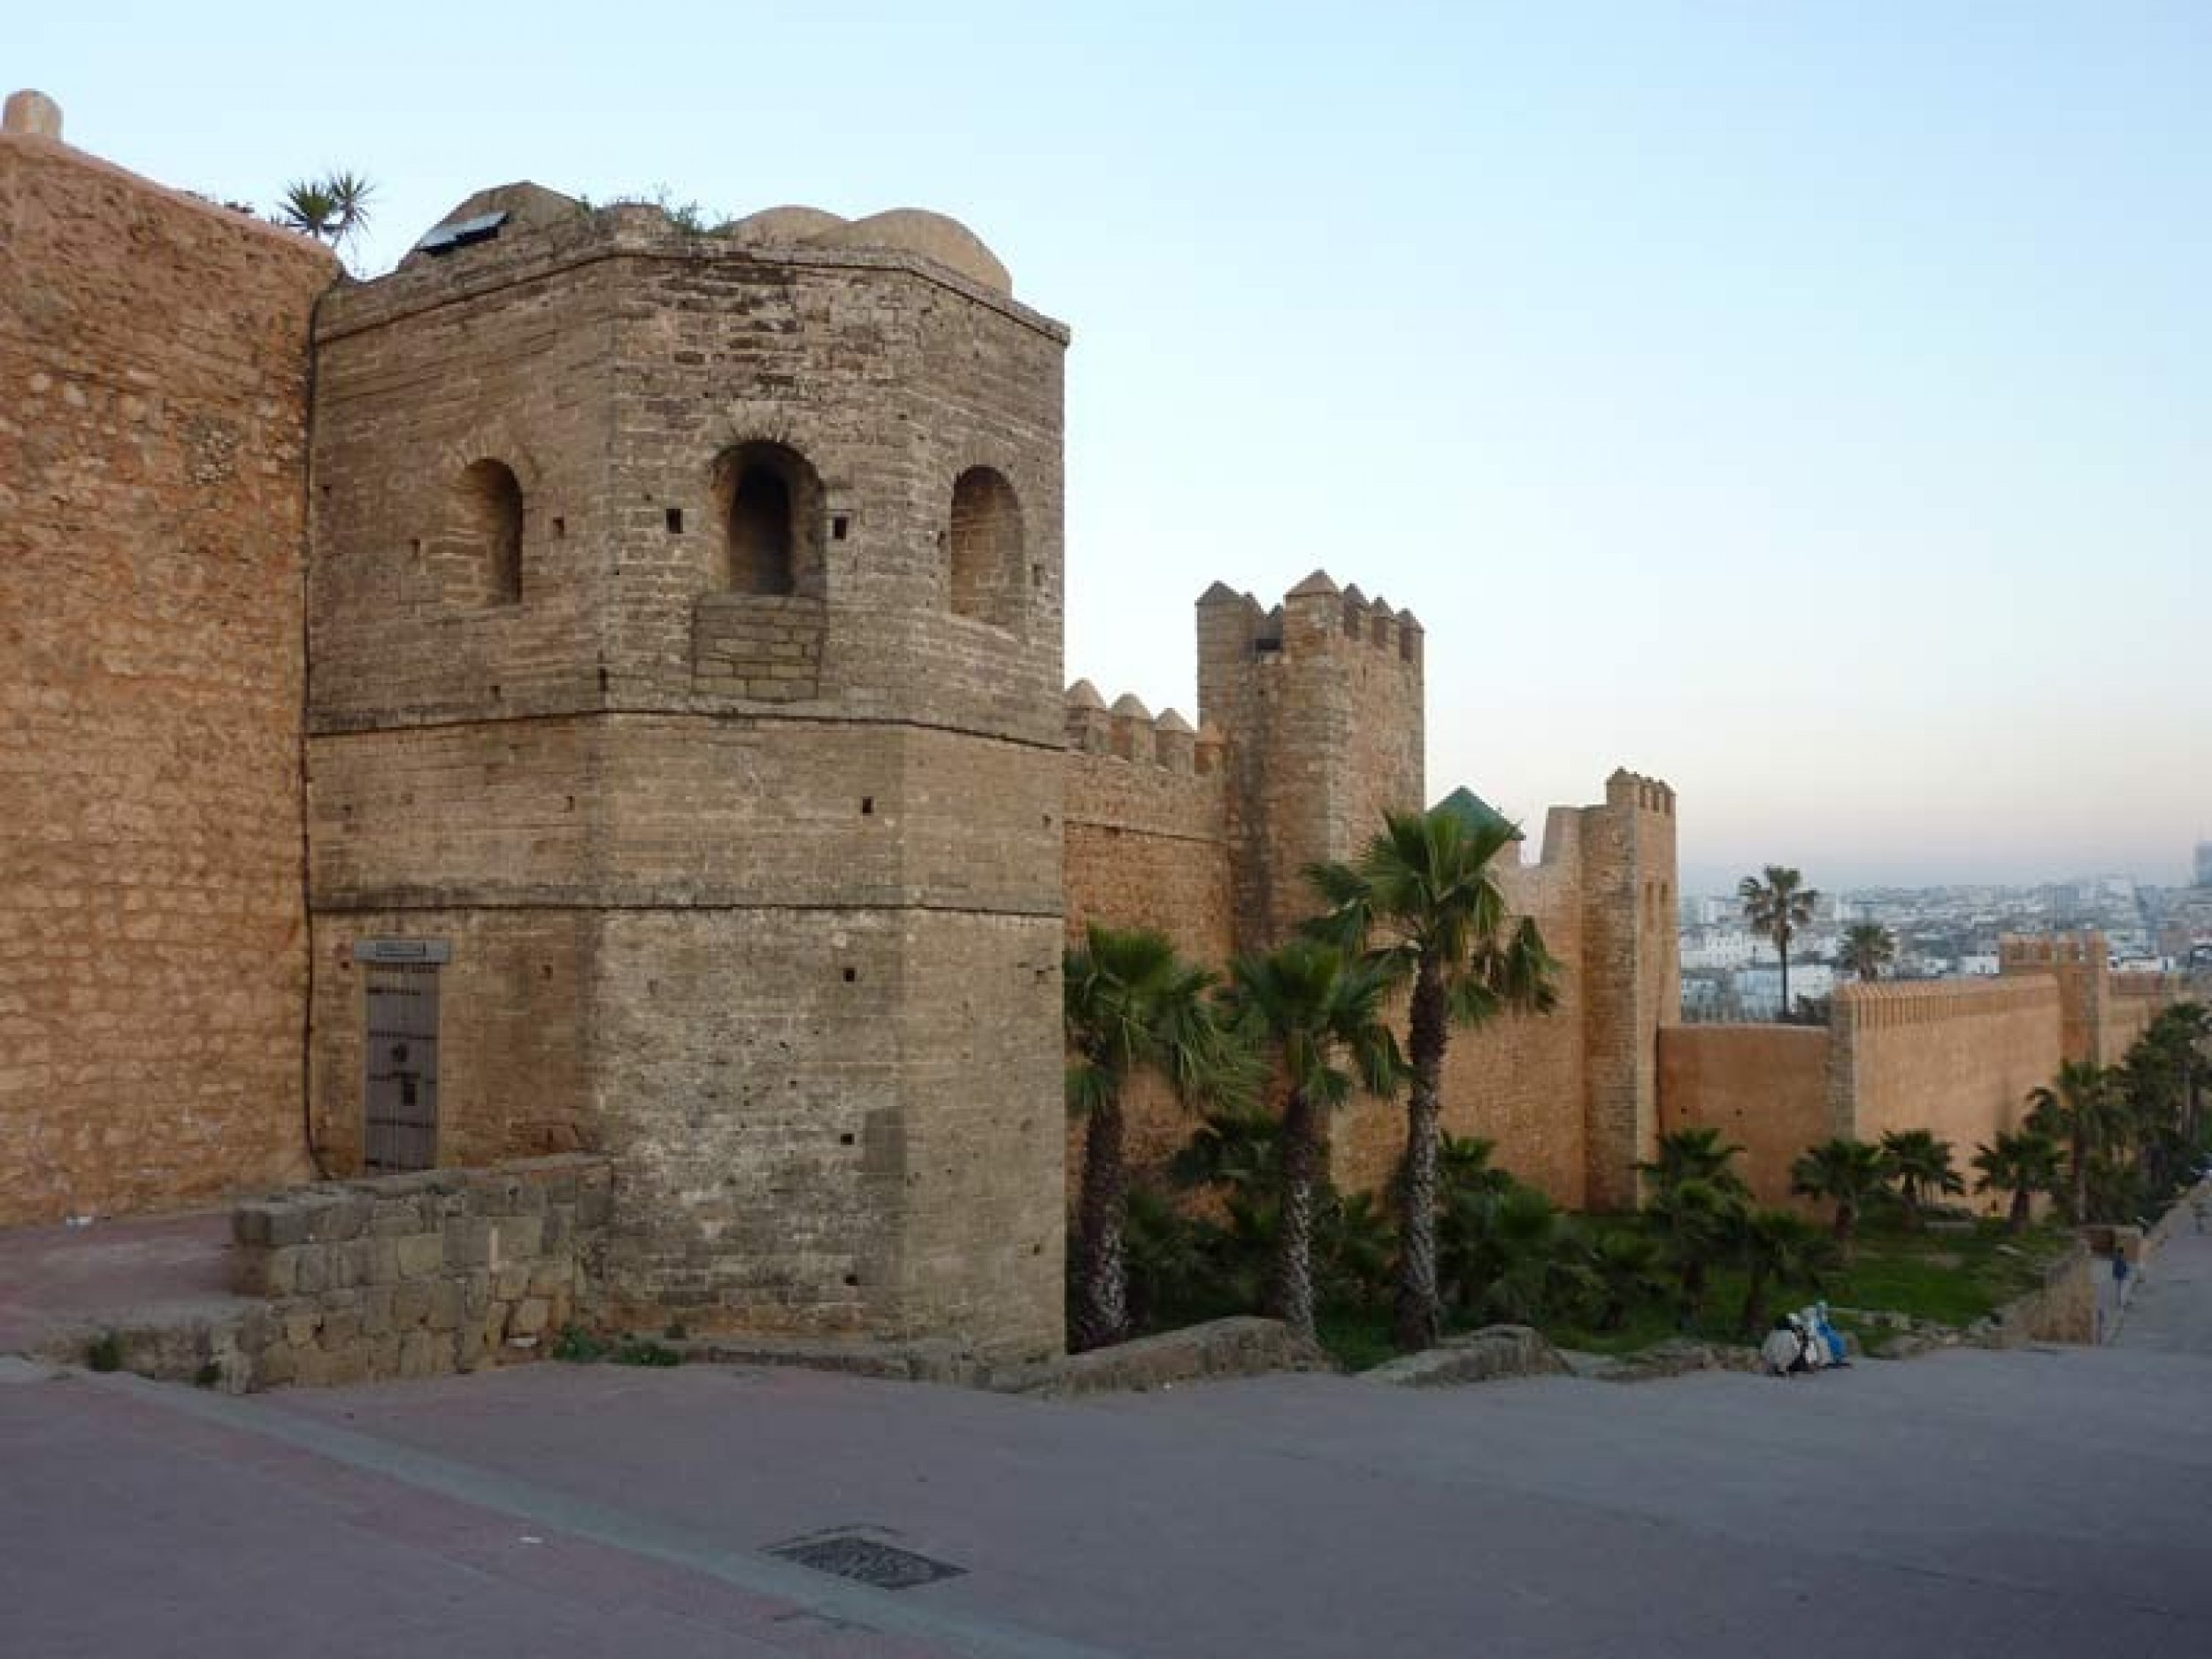 Rabat, modern capital and historic city a shared heritage